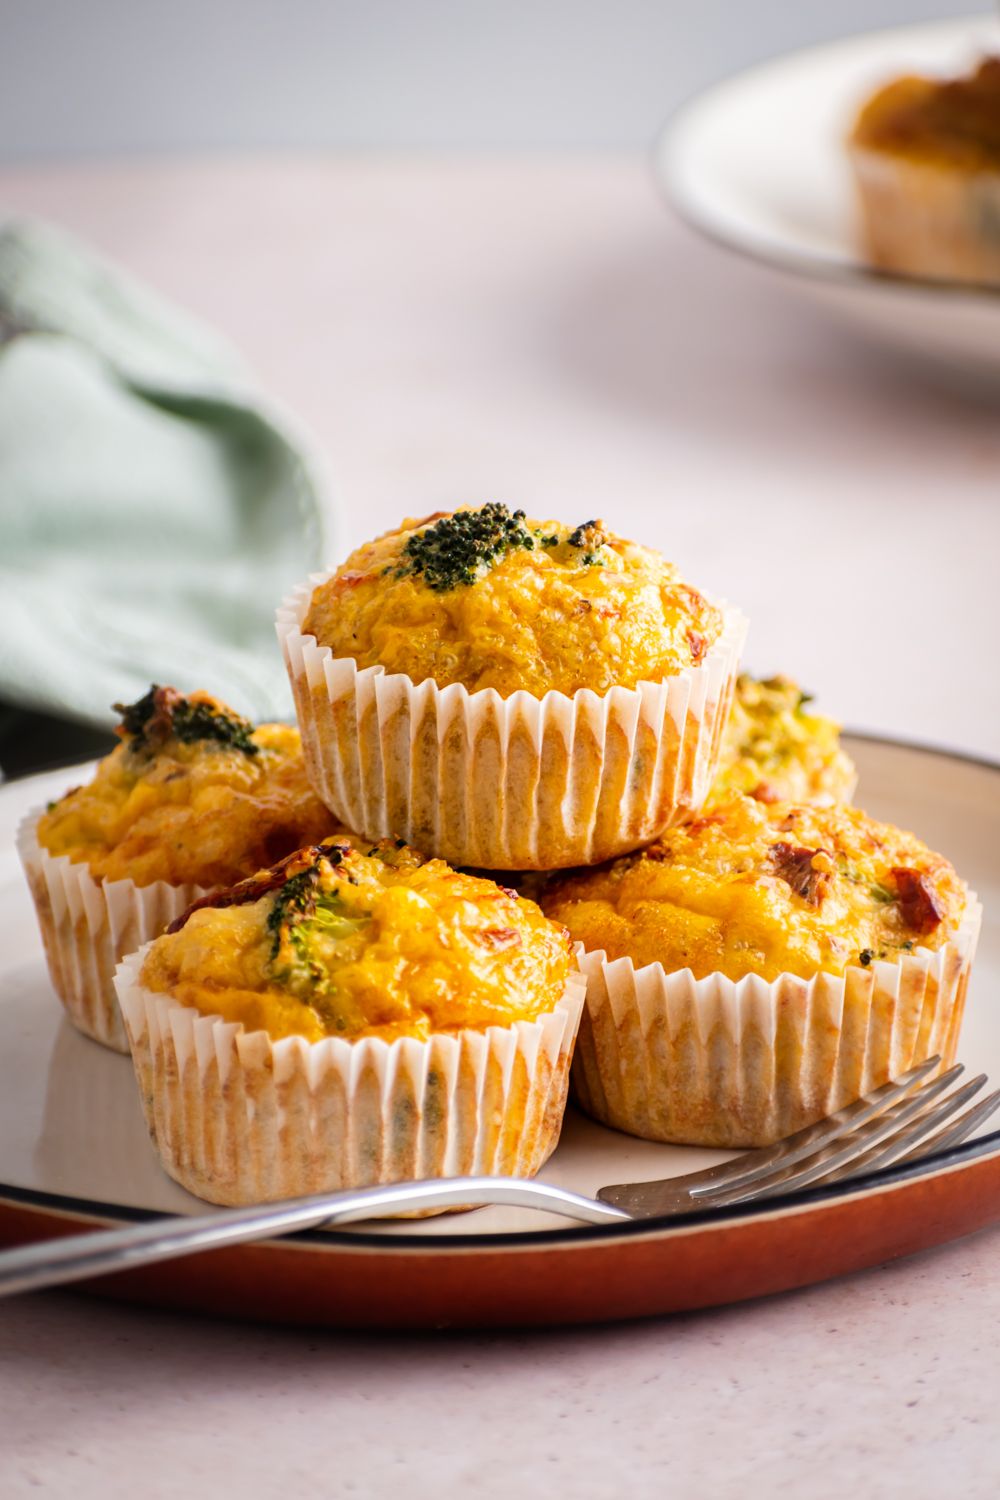 Breakfast egg muffins baked with quinoa, broccoli, tomatoes, and cheese on a plate with a blue napkin.